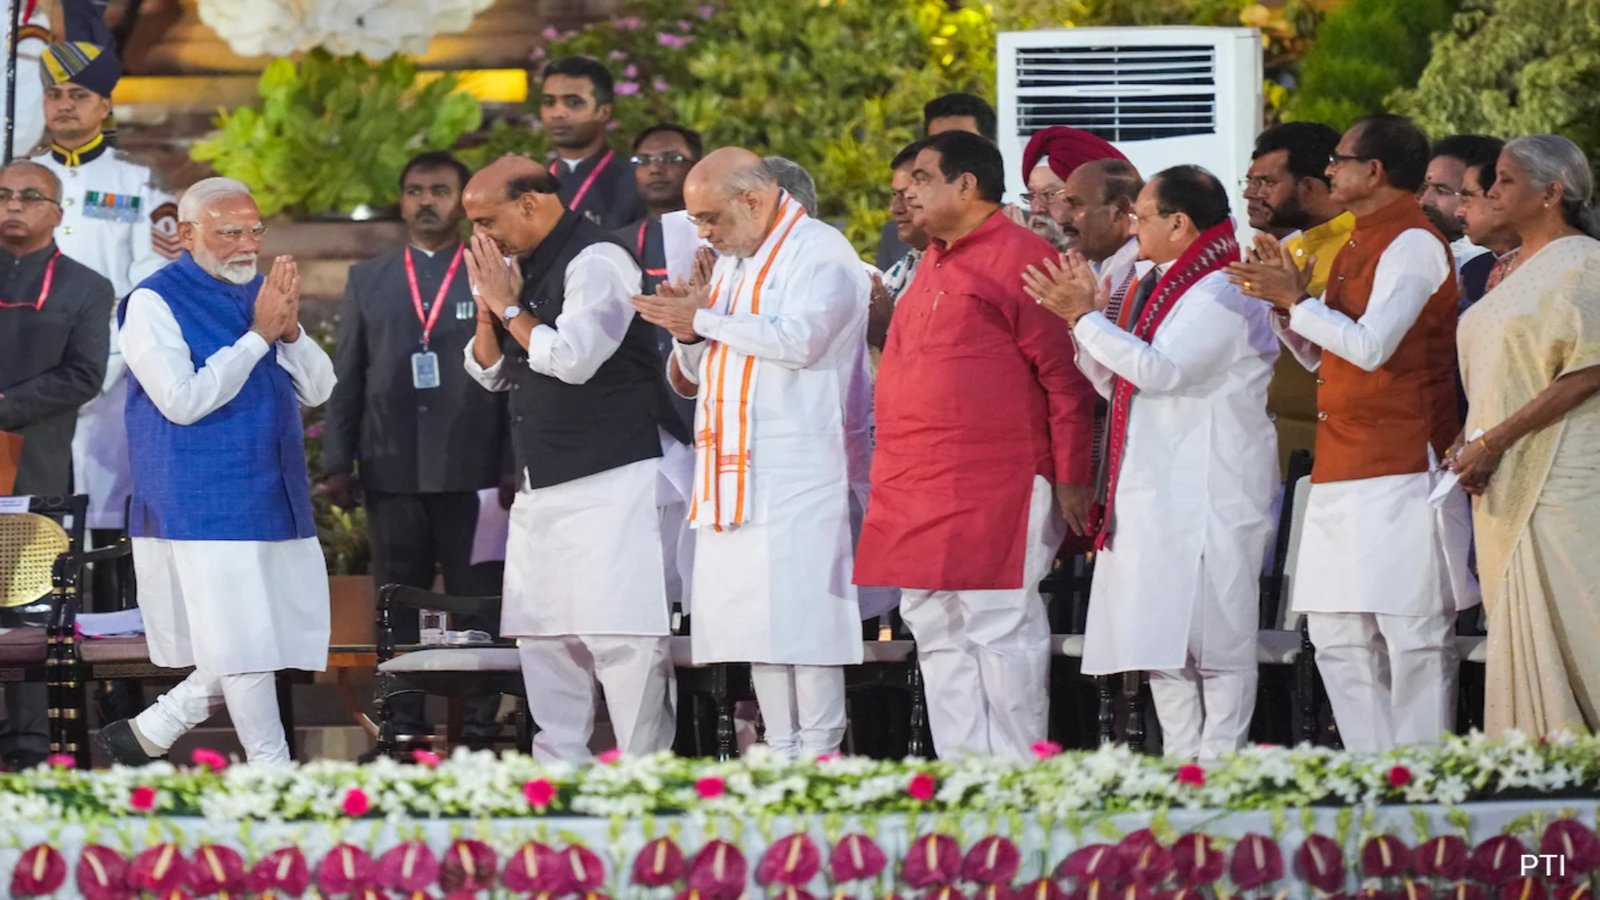 No Muslim minister in Modi’s Cabinet for the first time since independence